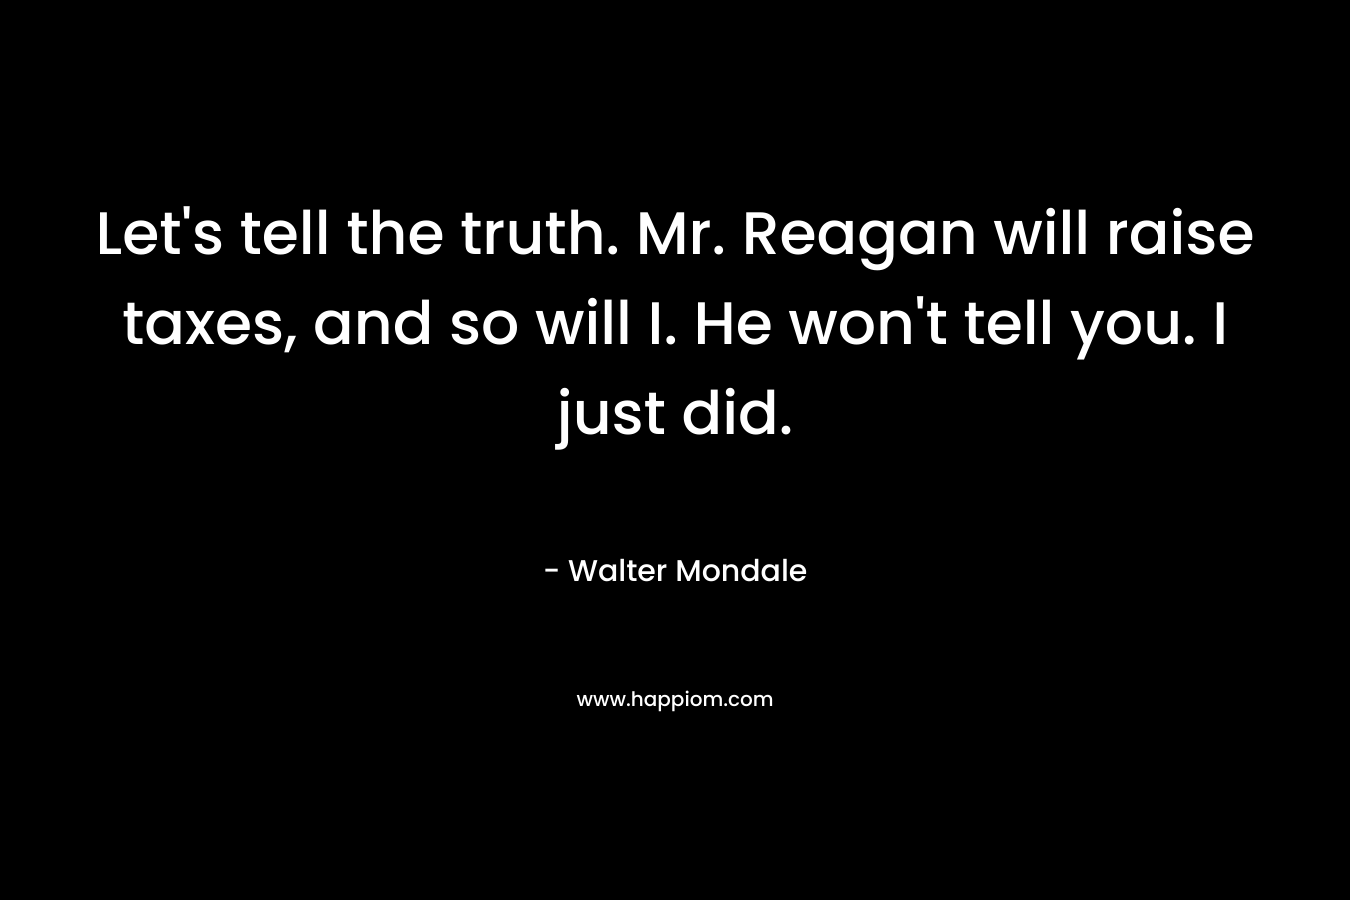 Let's tell the truth. Mr. Reagan will raise taxes, and so will I. He won't tell you. I just did.